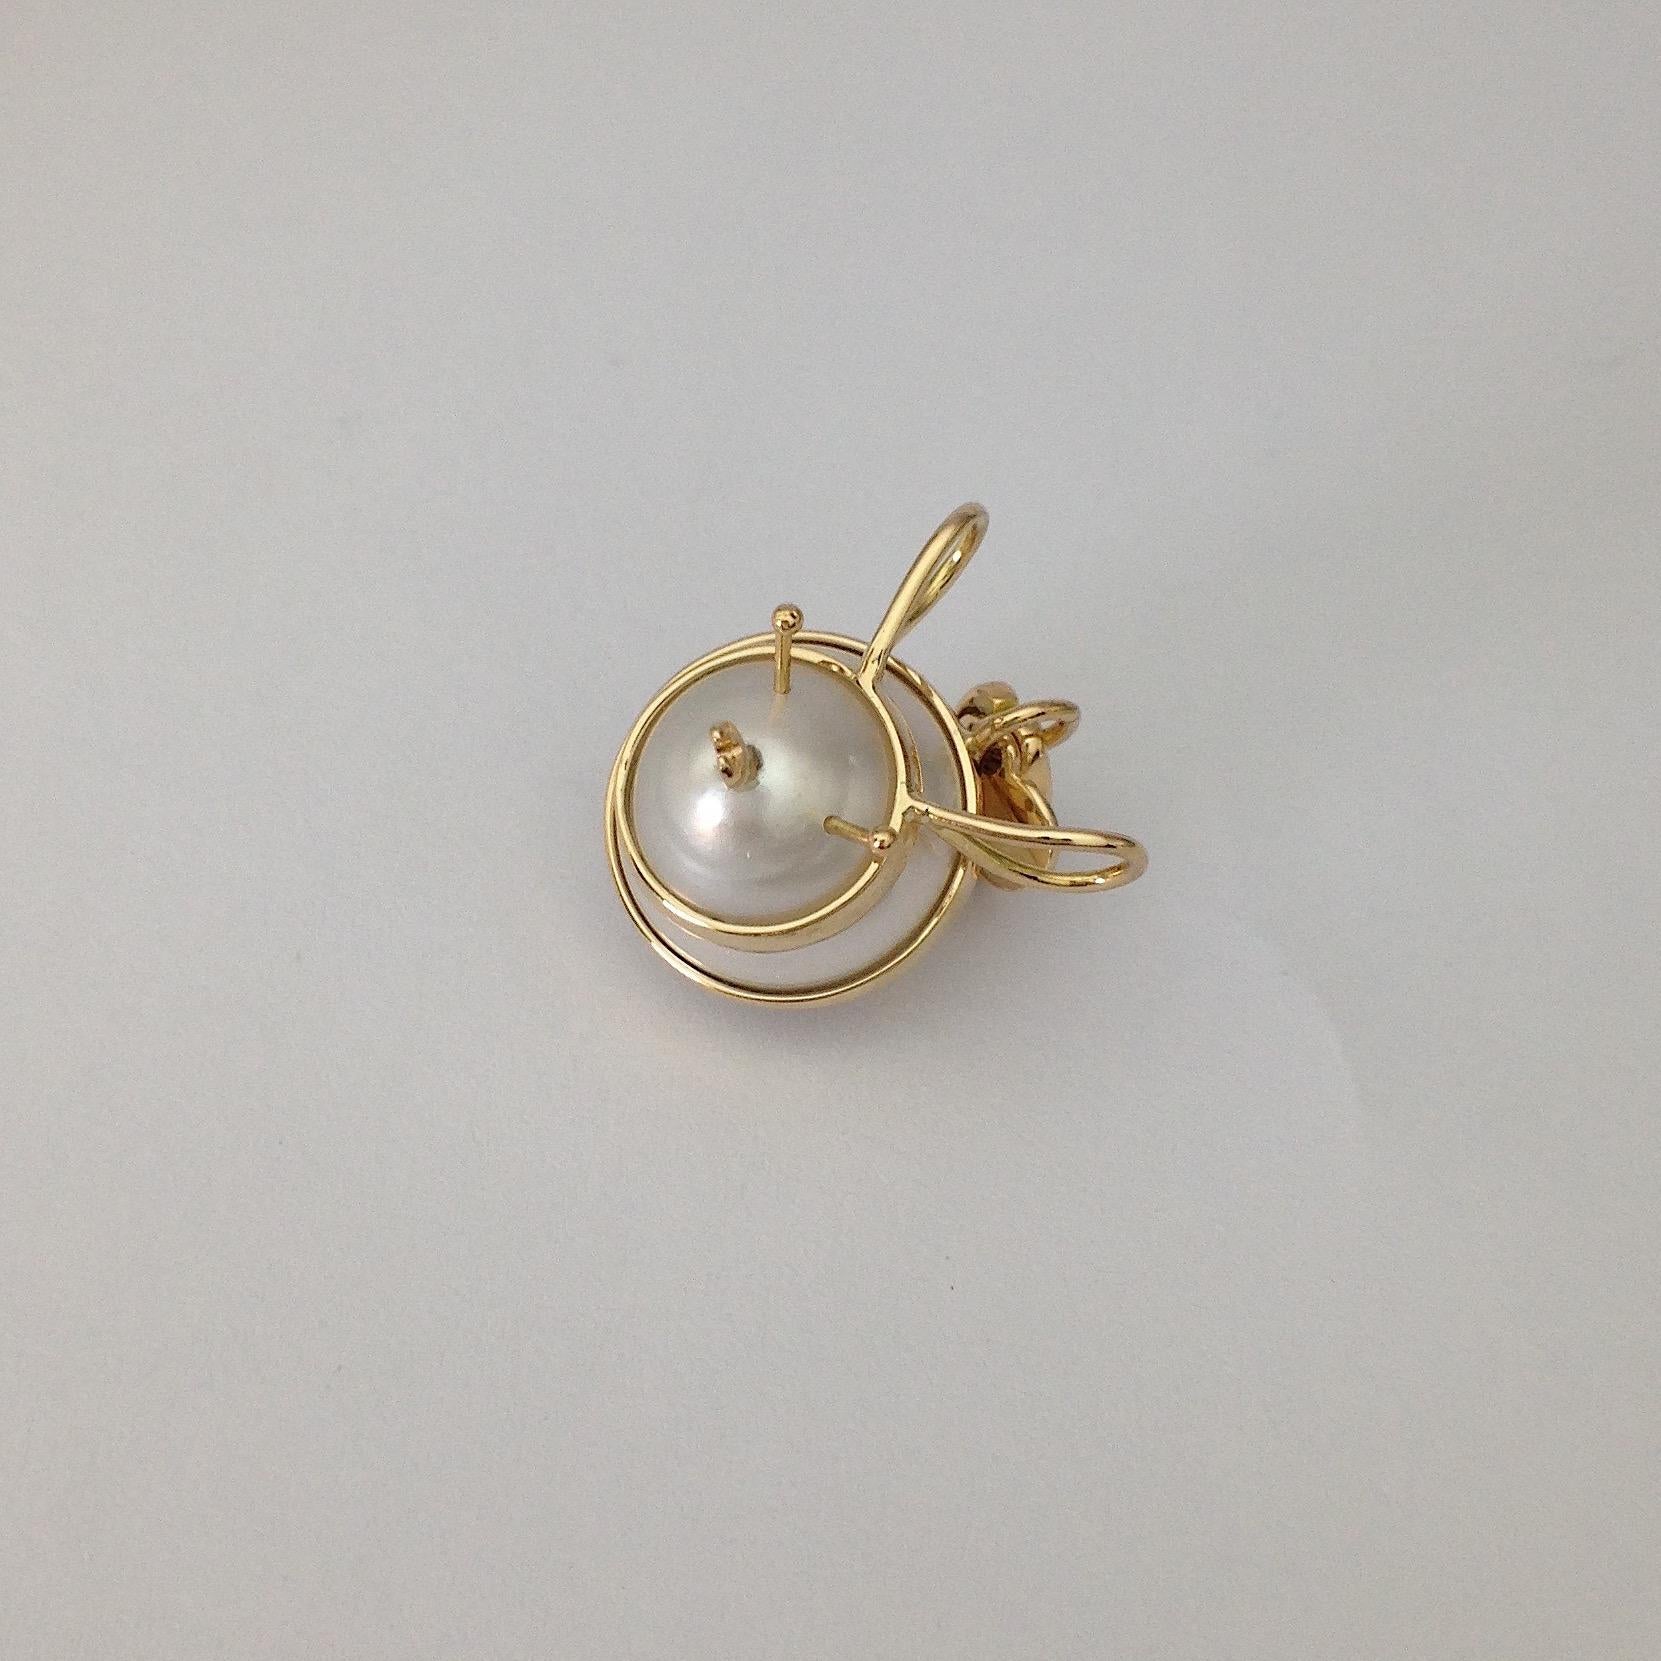 Petronilla Bee 18 Kt Gold Australian Pearl Charm/ Pendant or Necklace Made in IT 3